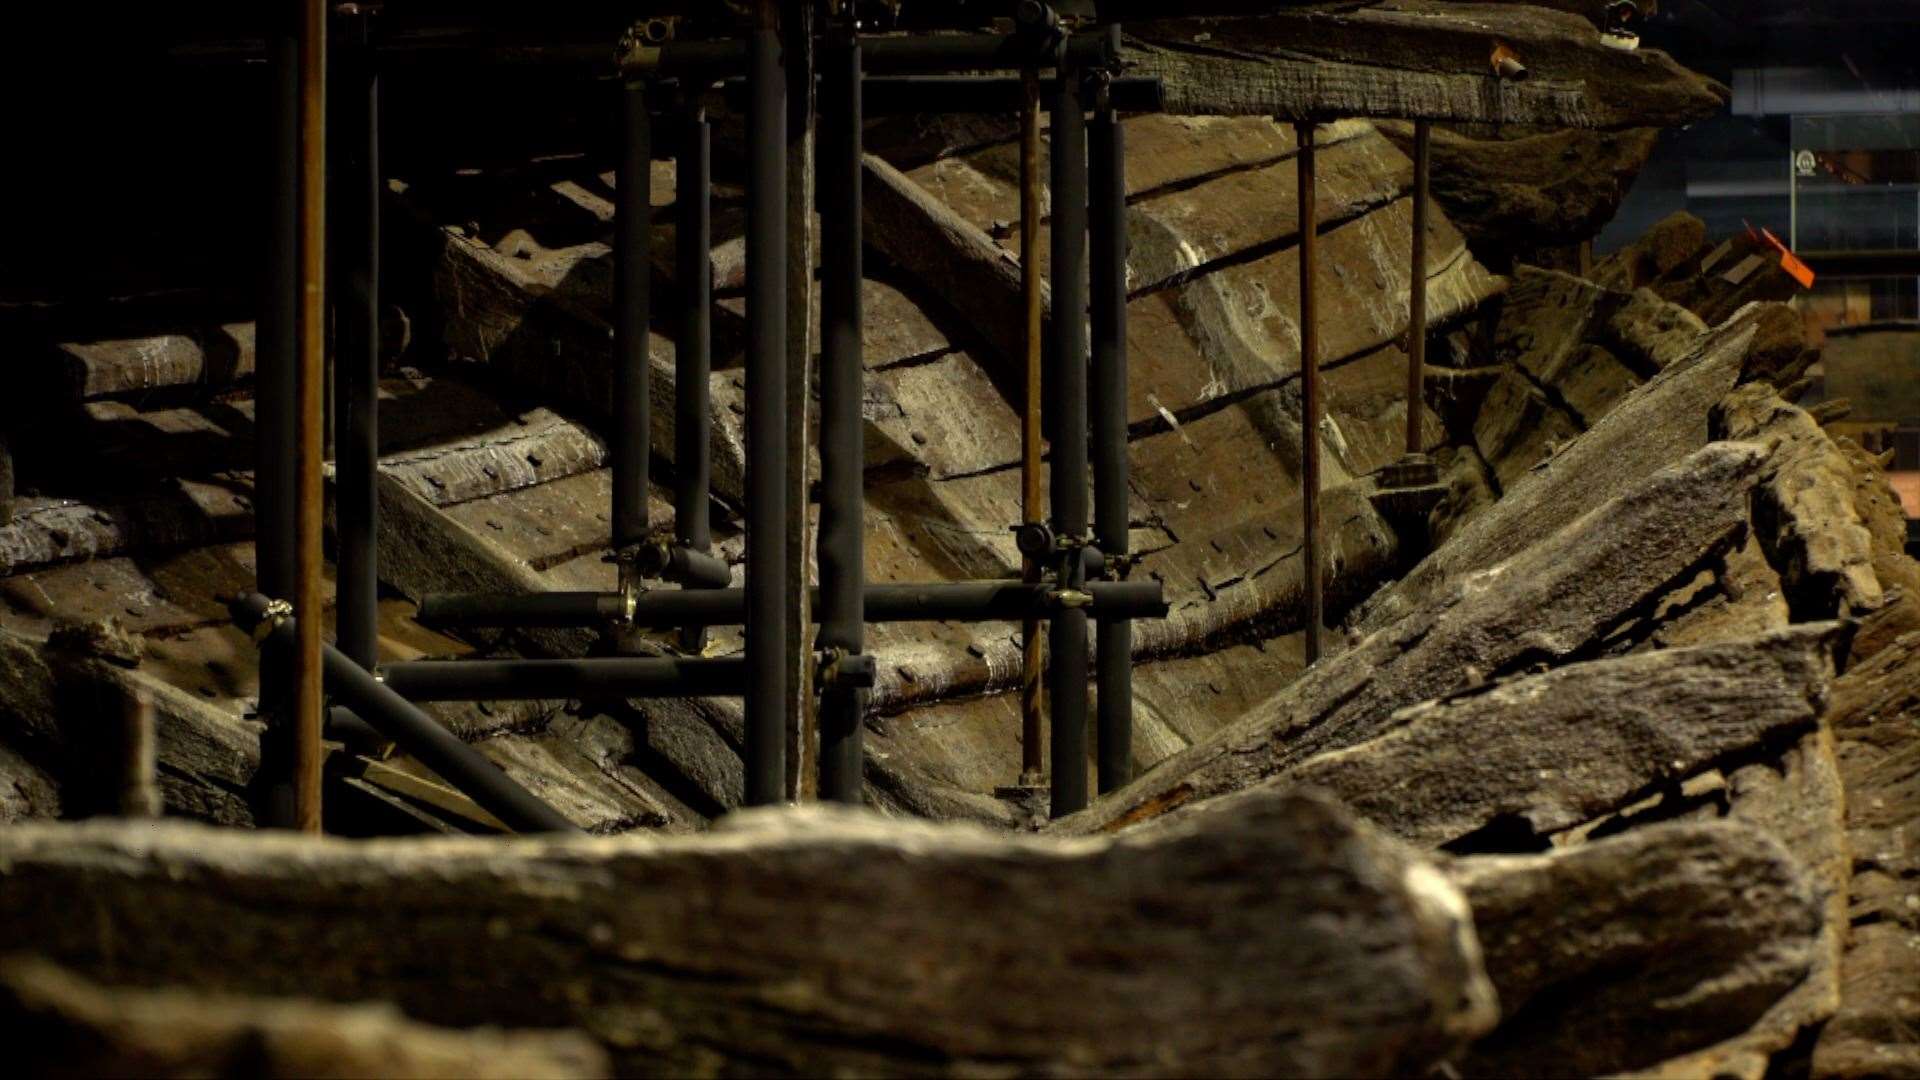 The 'chemical conundrum' of conserving the ship's timbers